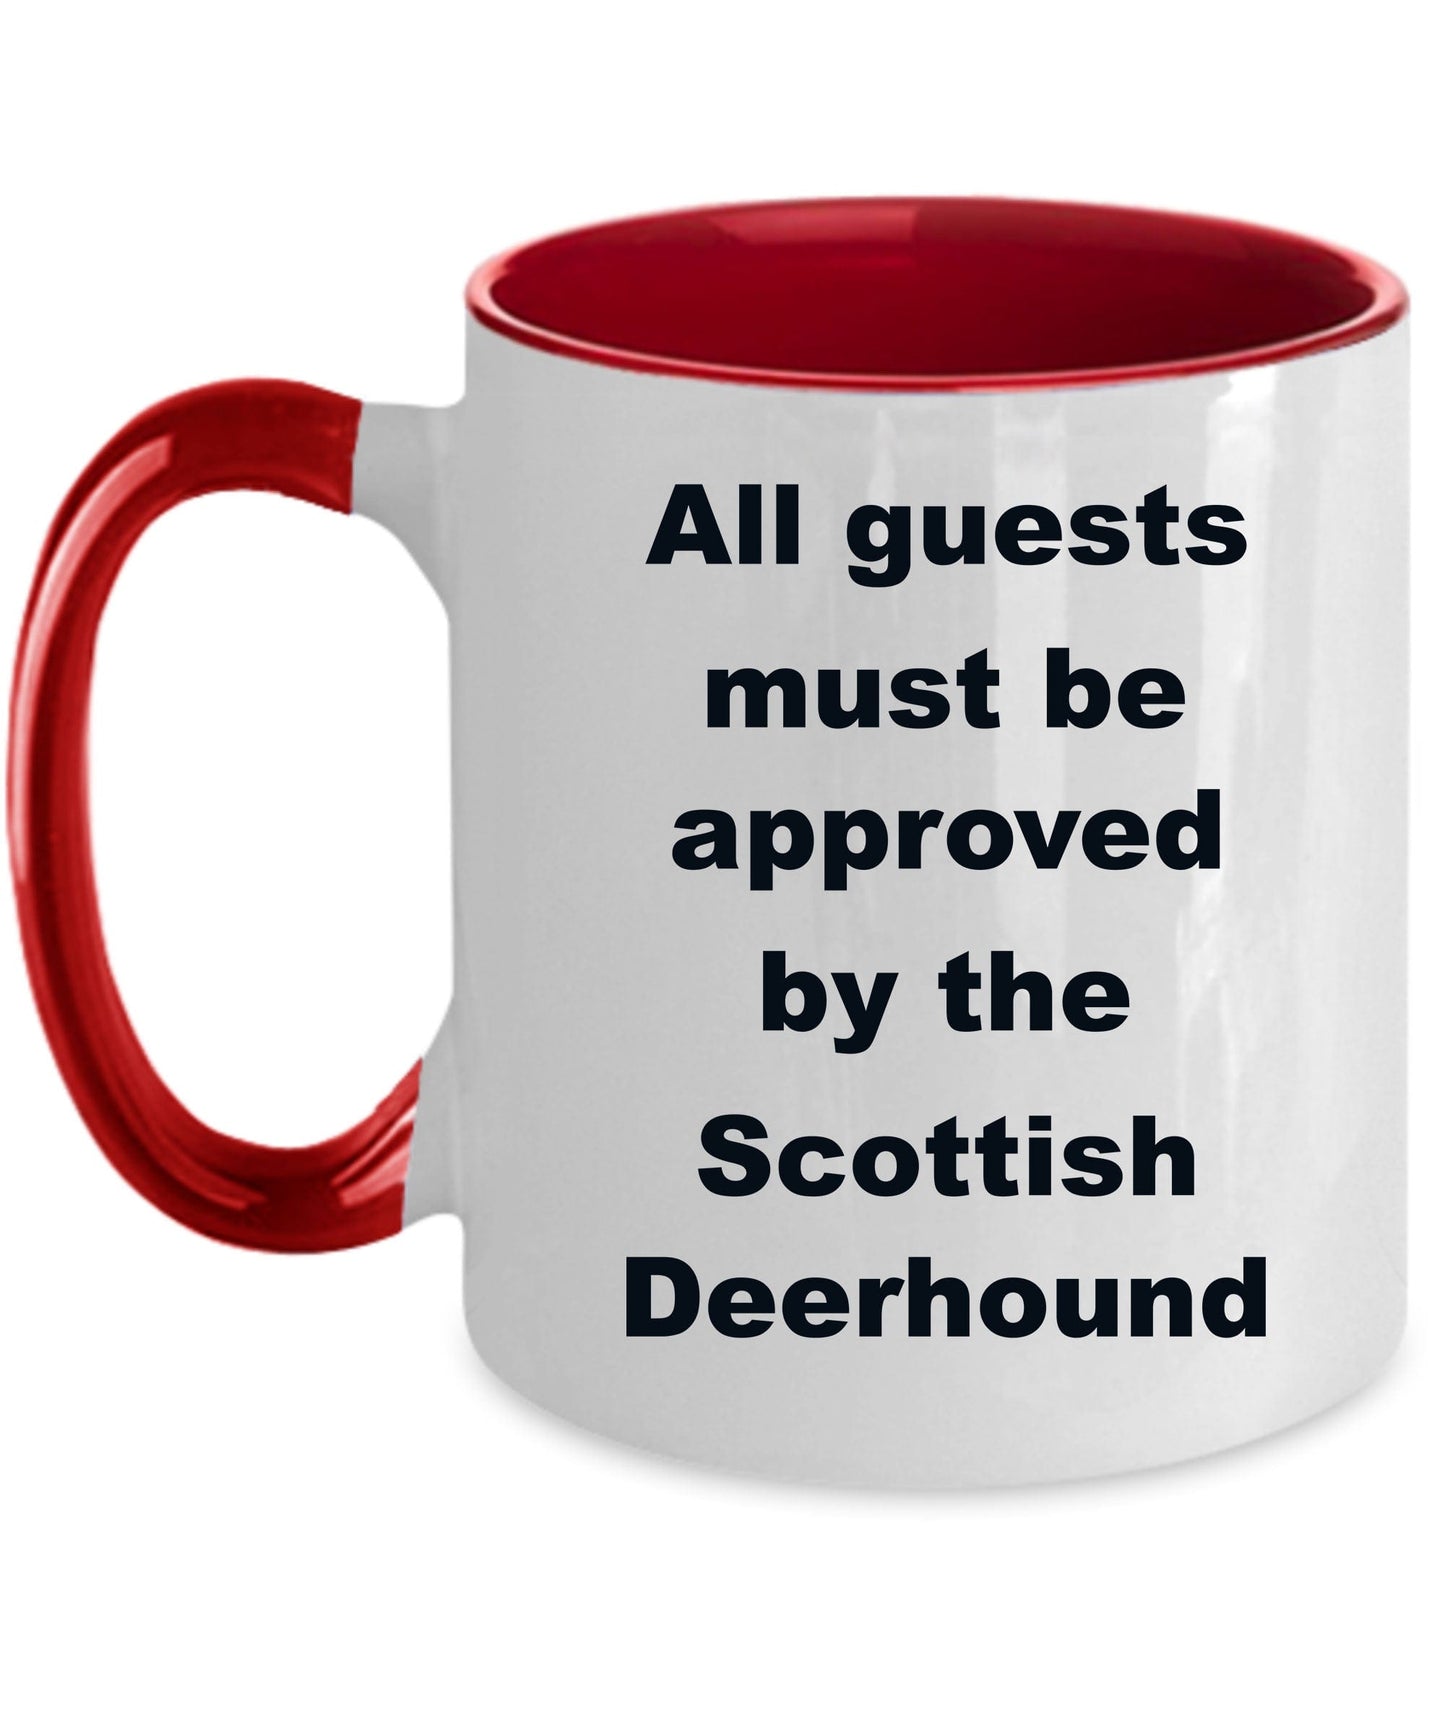 Scottish Deerhound Coffee Mug - All guests must be approved